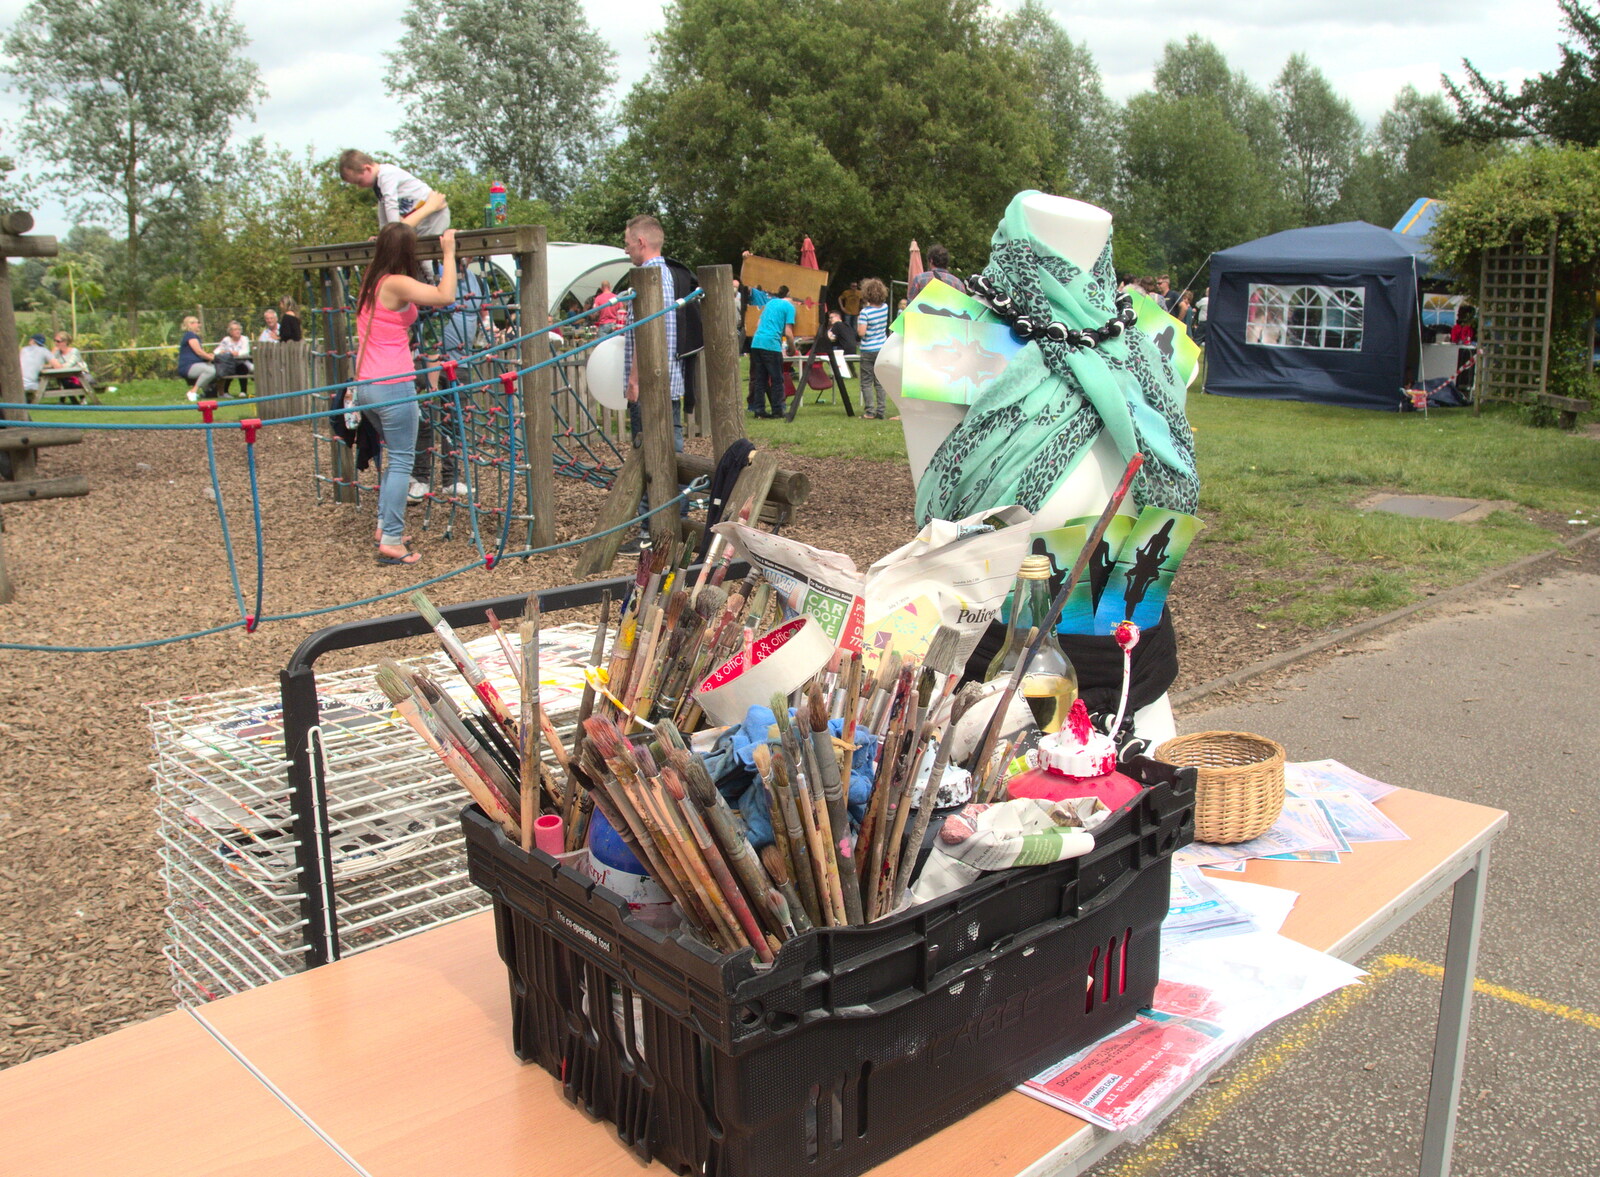 A box of paintbrushes from Eye Primary Summer Fayre, Eye, Suffolk - 9th July 2016